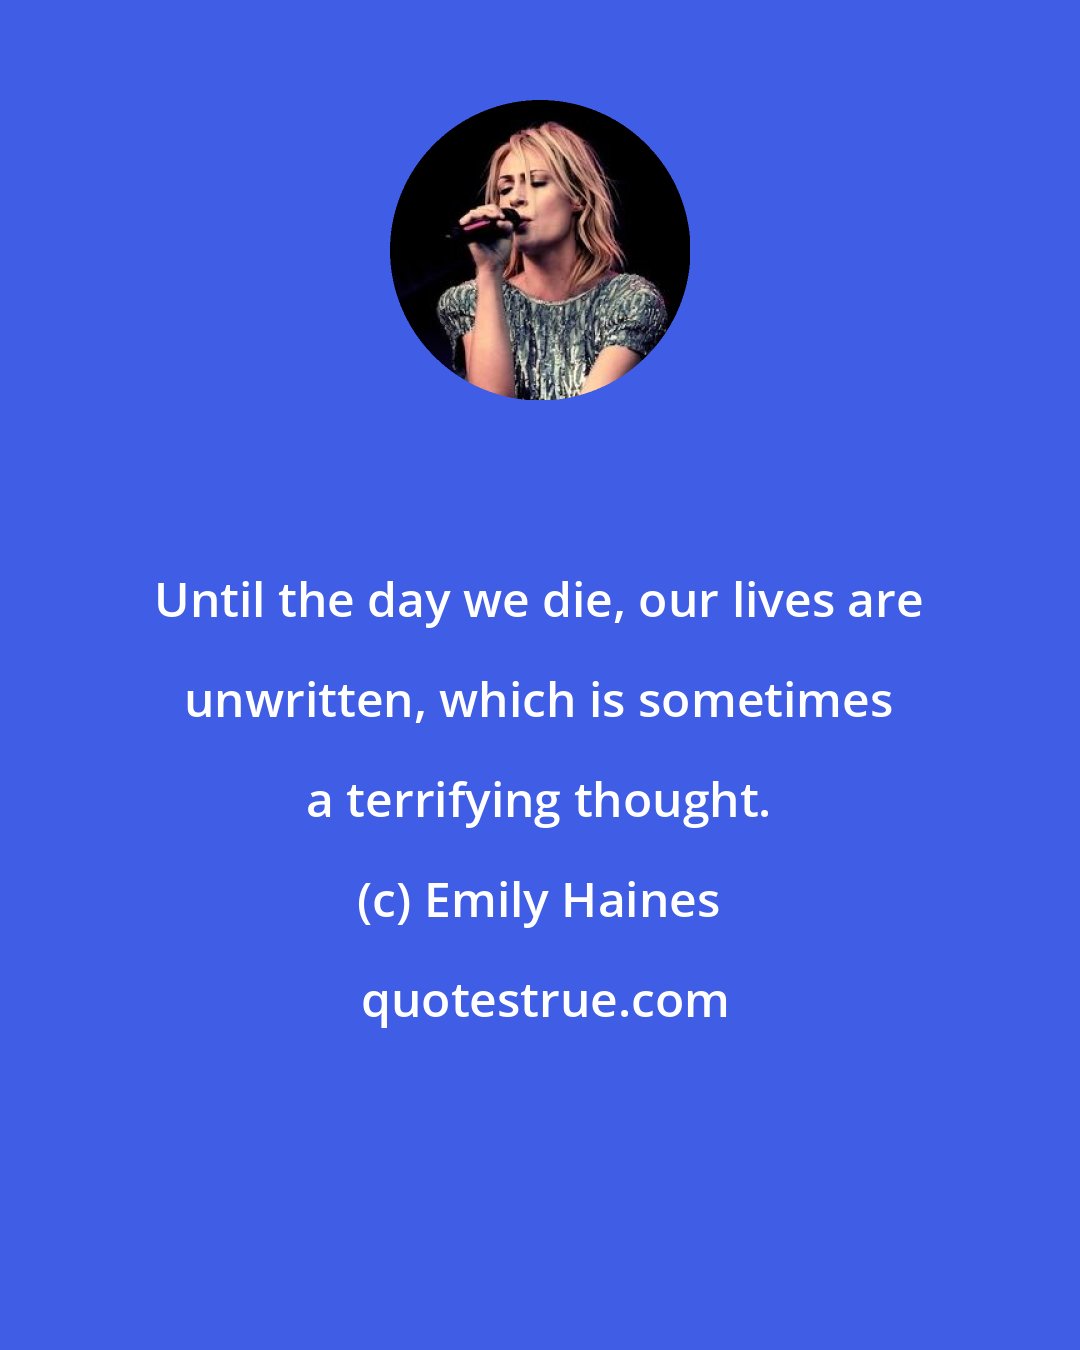 Emily Haines: Until the day we die, our lives are unwritten, which is sometimes a terrifying thought.